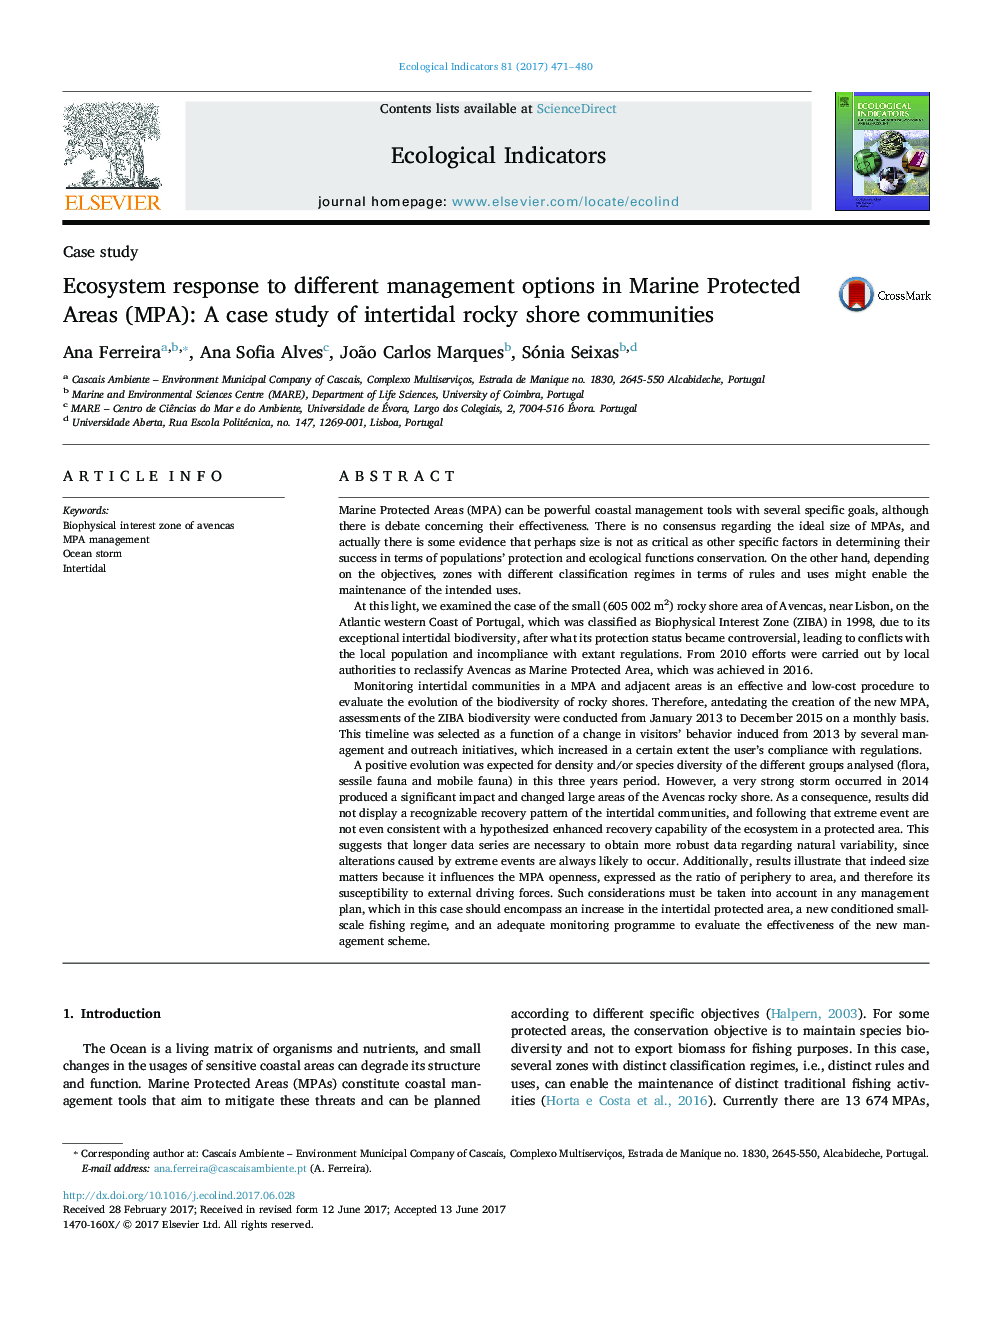 Ecosystem response to different management options in Marine Protected Areas (MPA): A case study of intertidal rocky shore communities